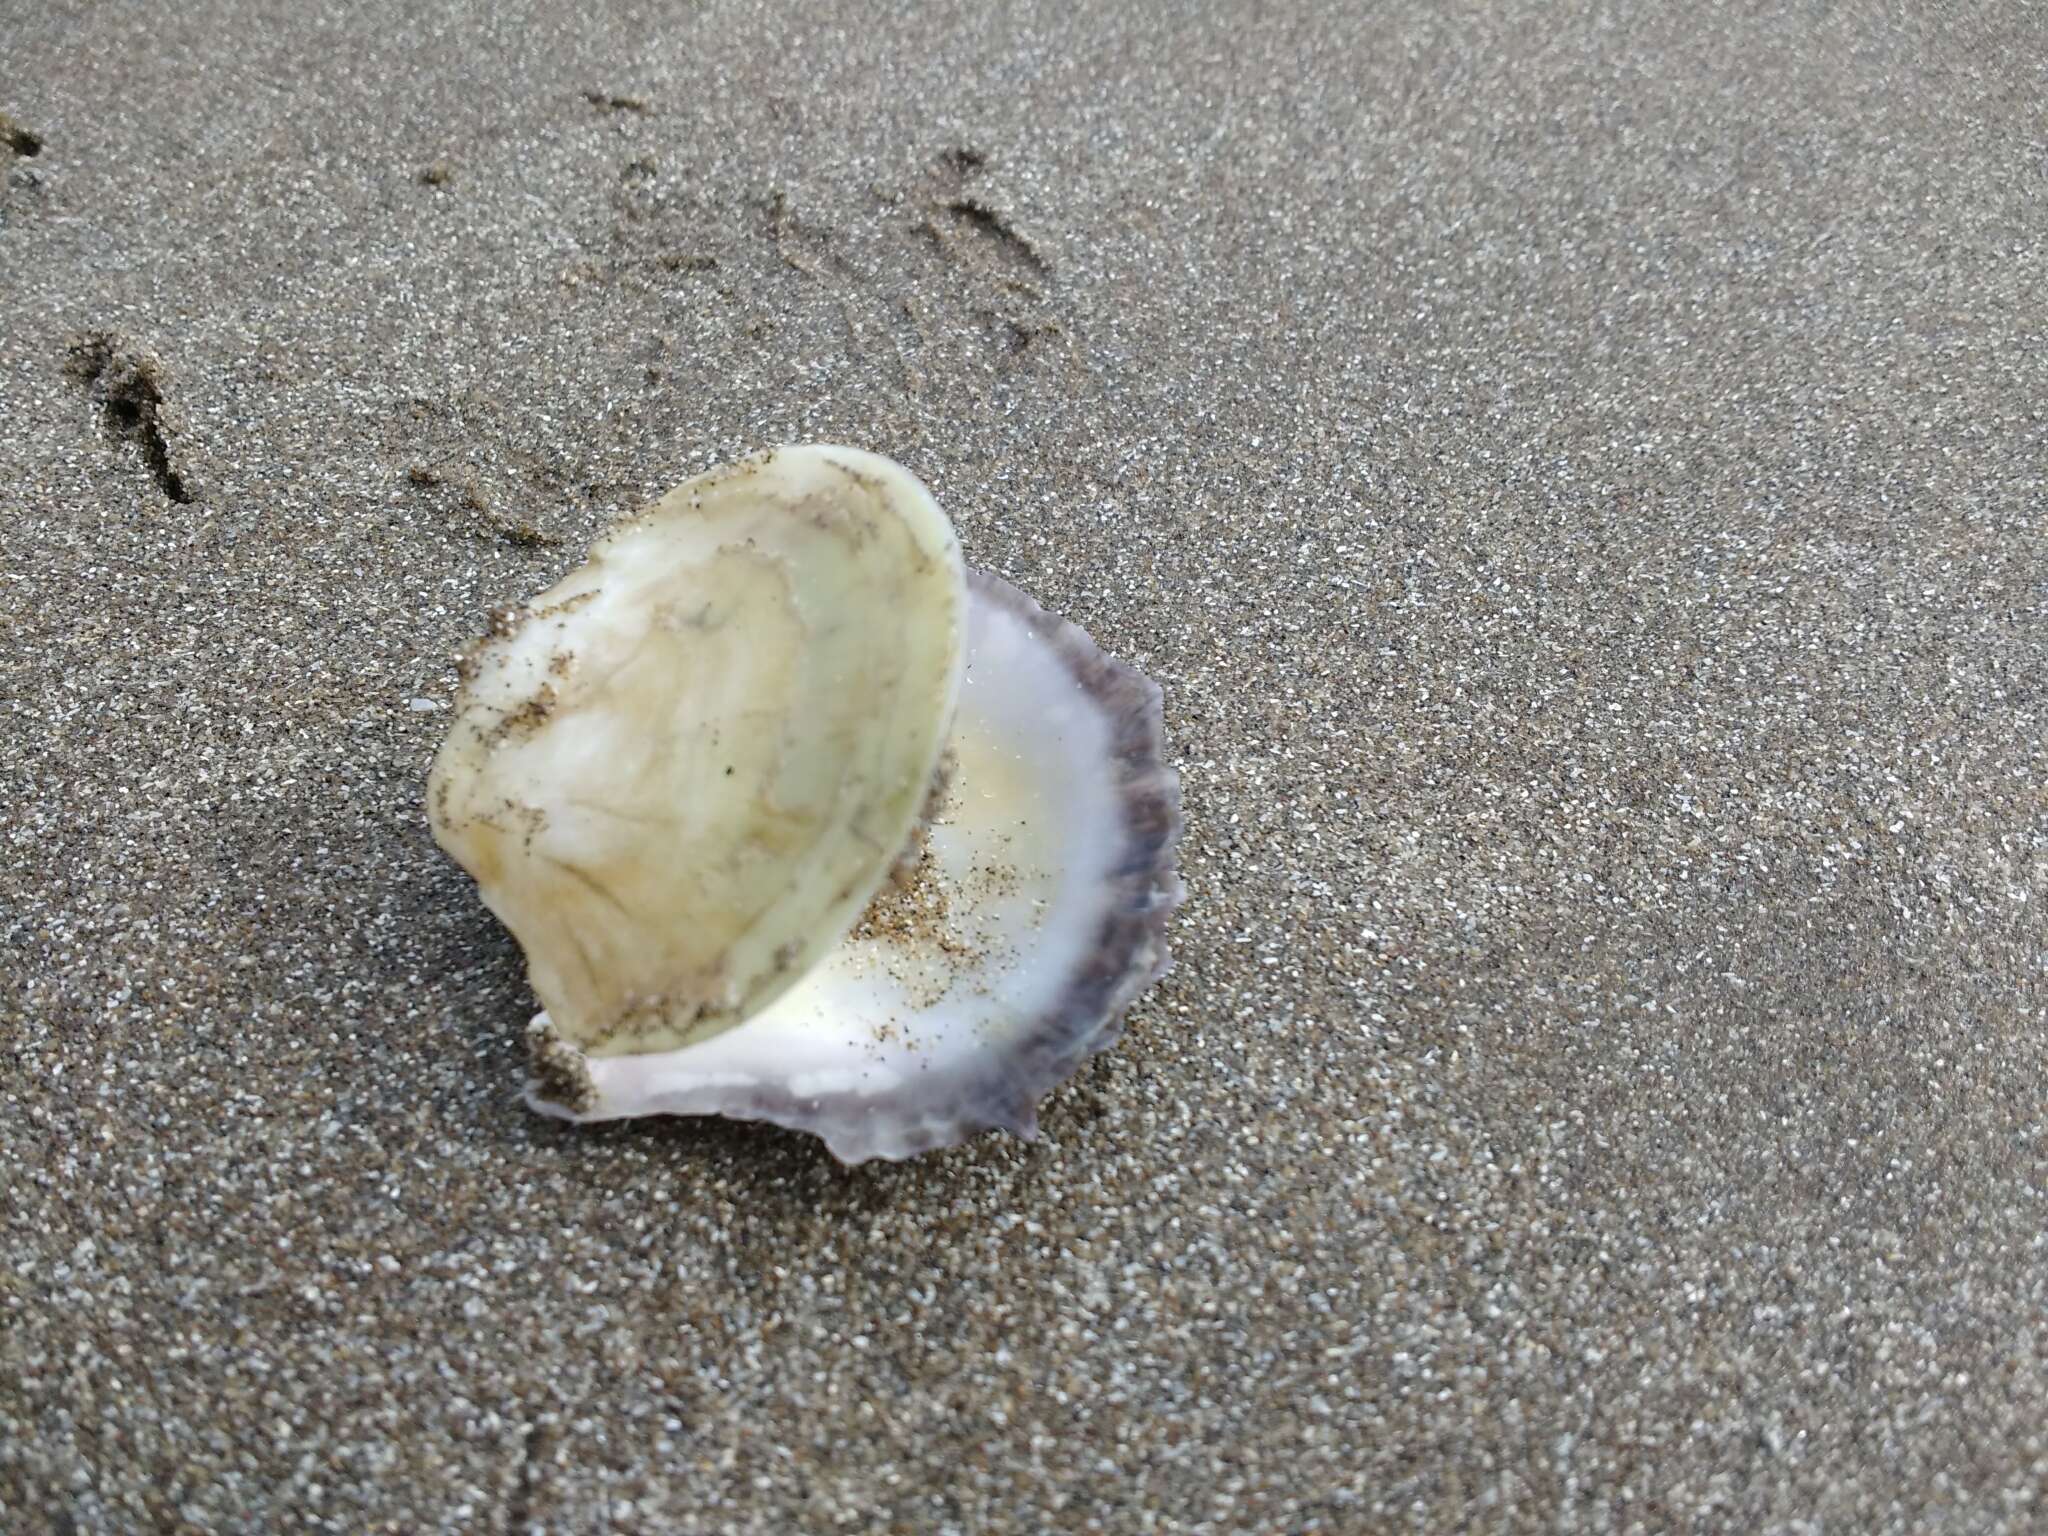 Image of Argentine flat oyster